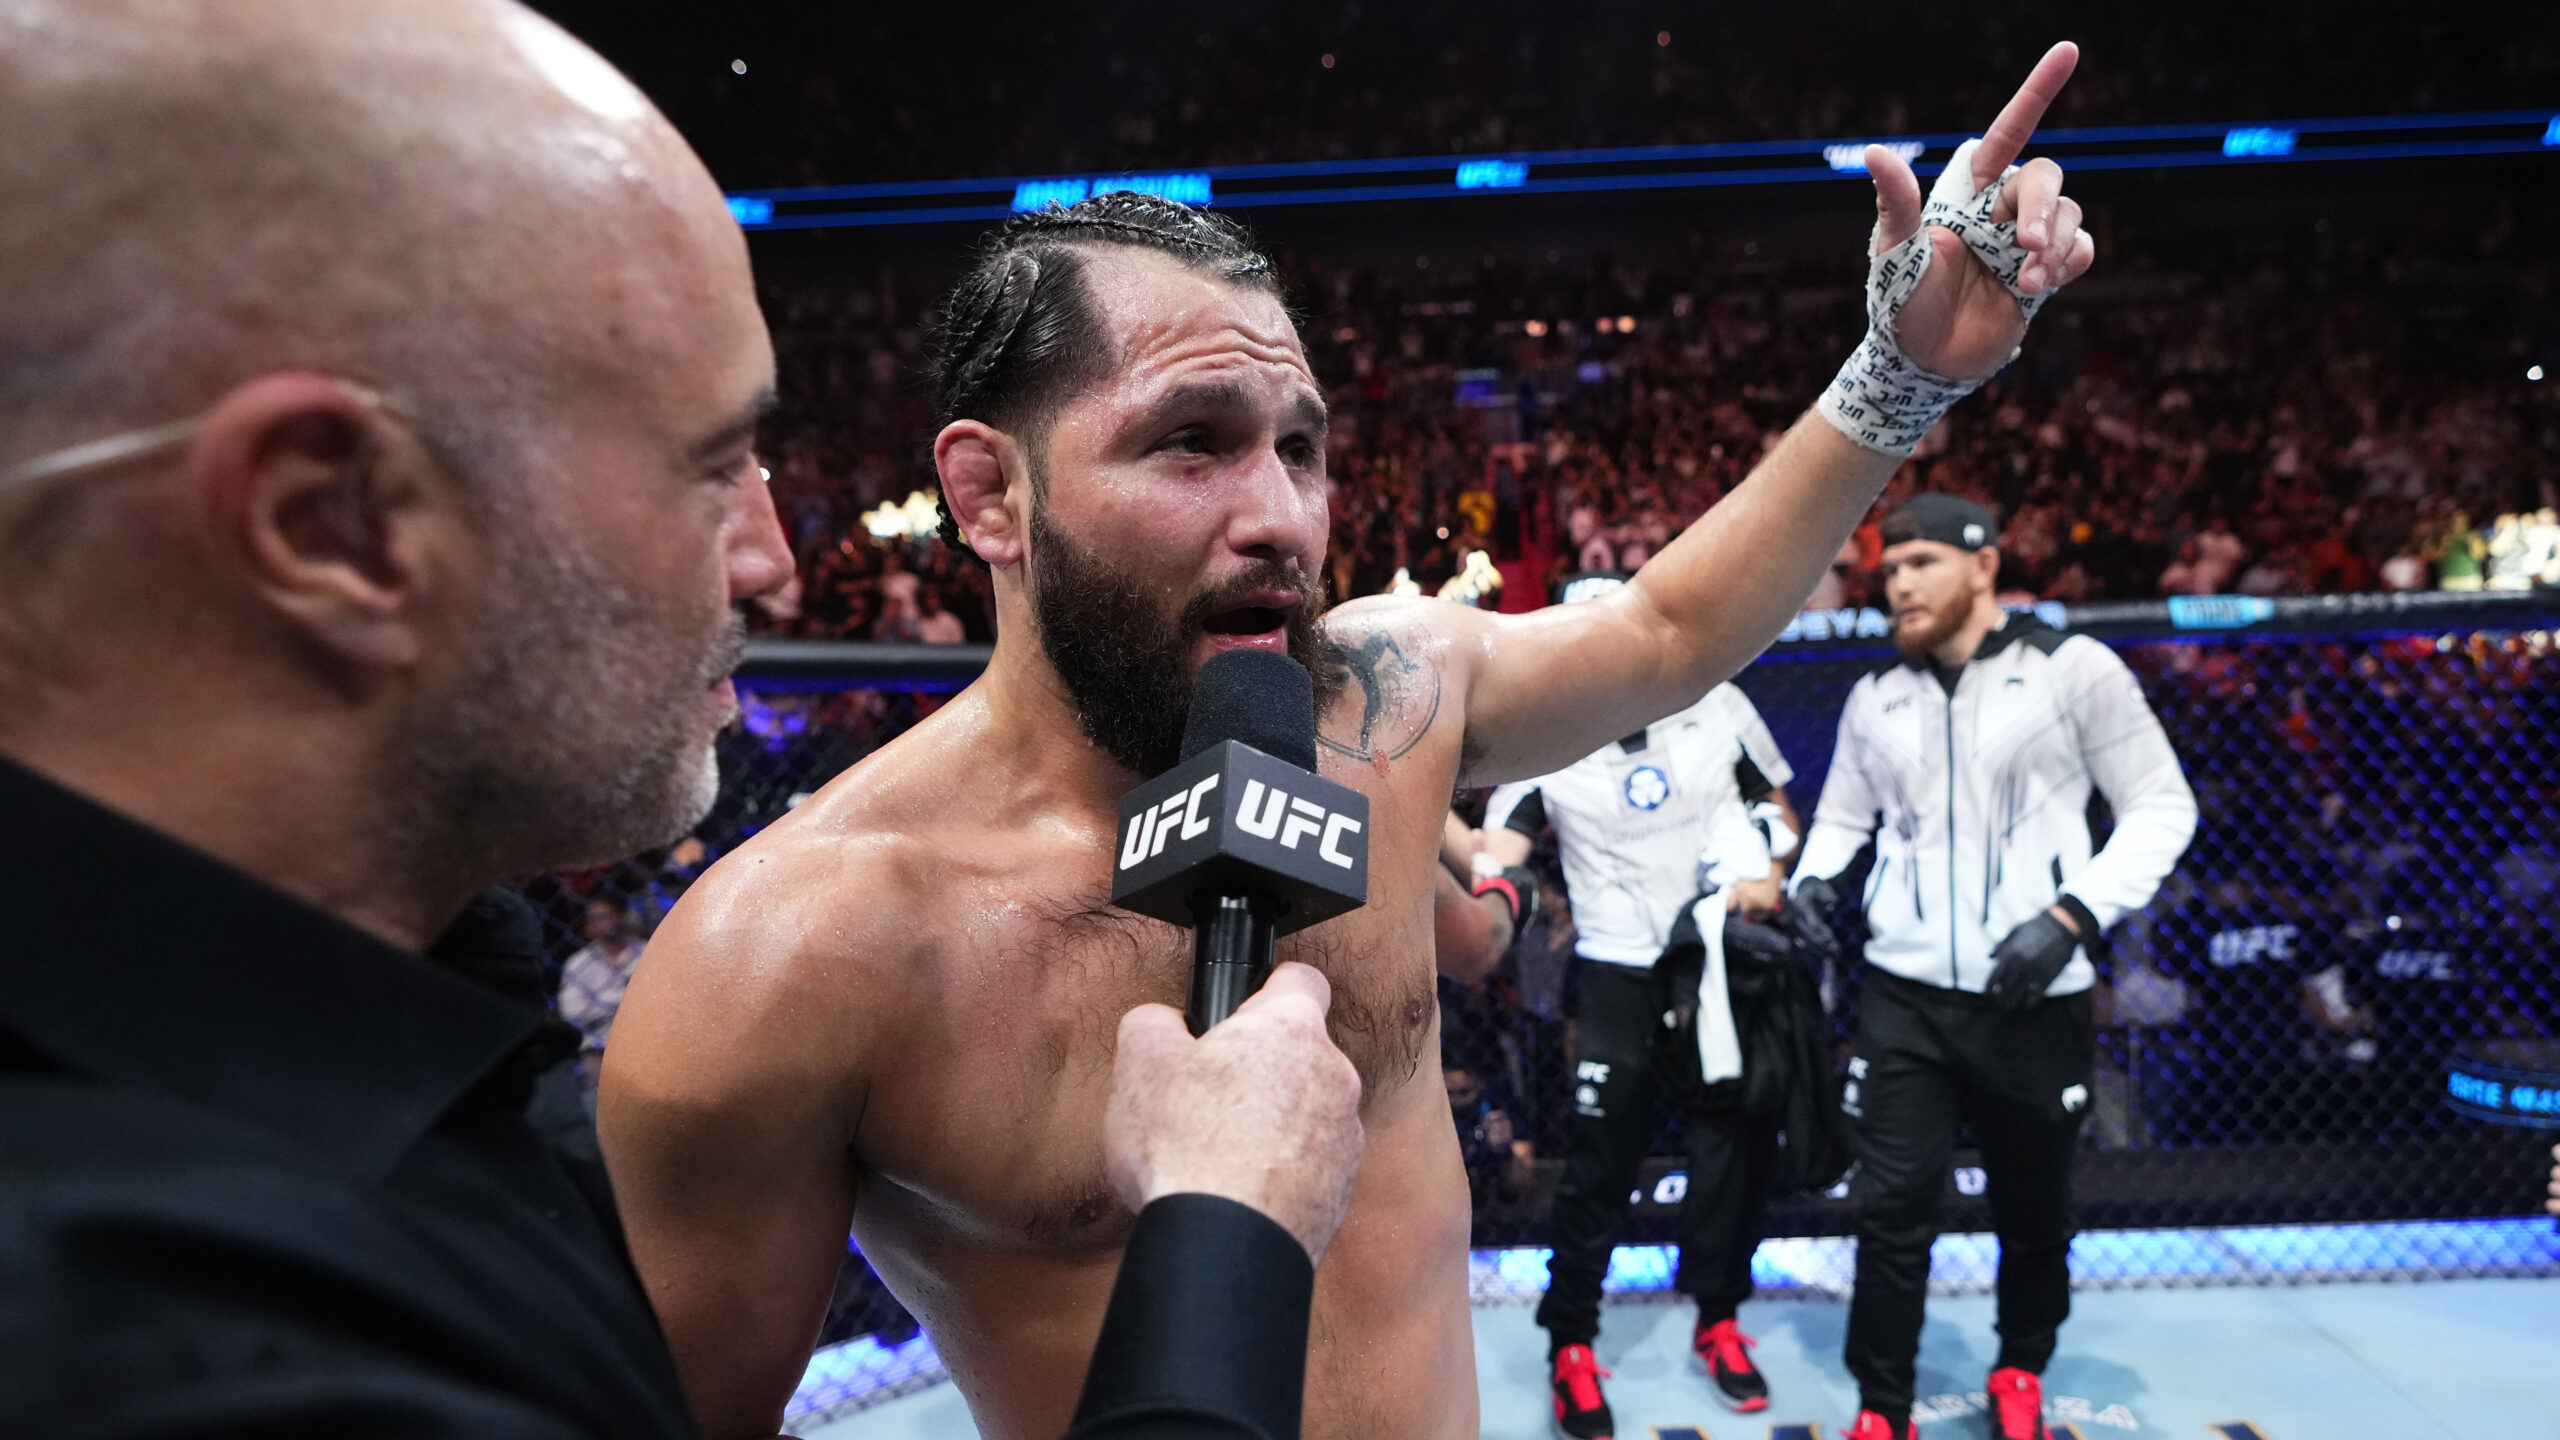 Ex-UFC star Jorge Masvidal’s home was the site of a shooting. One person has been arrested.